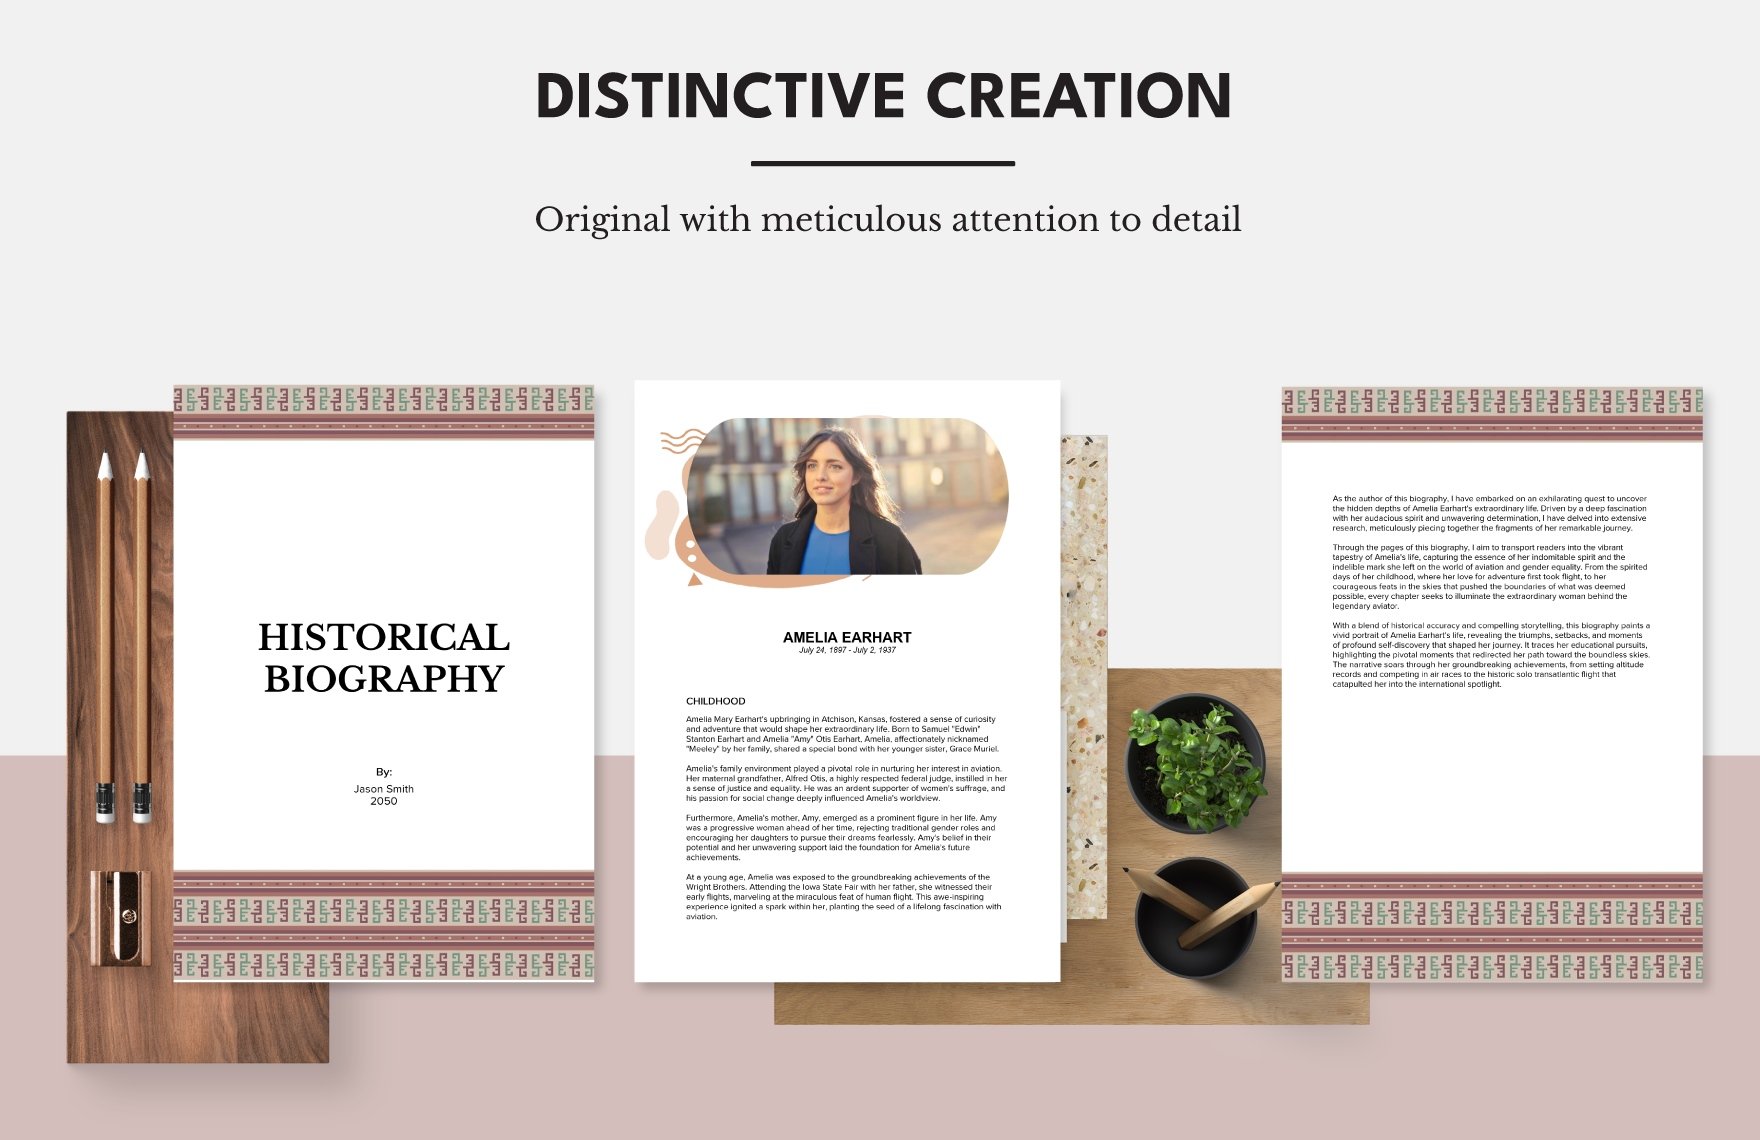 Historical Biography Template